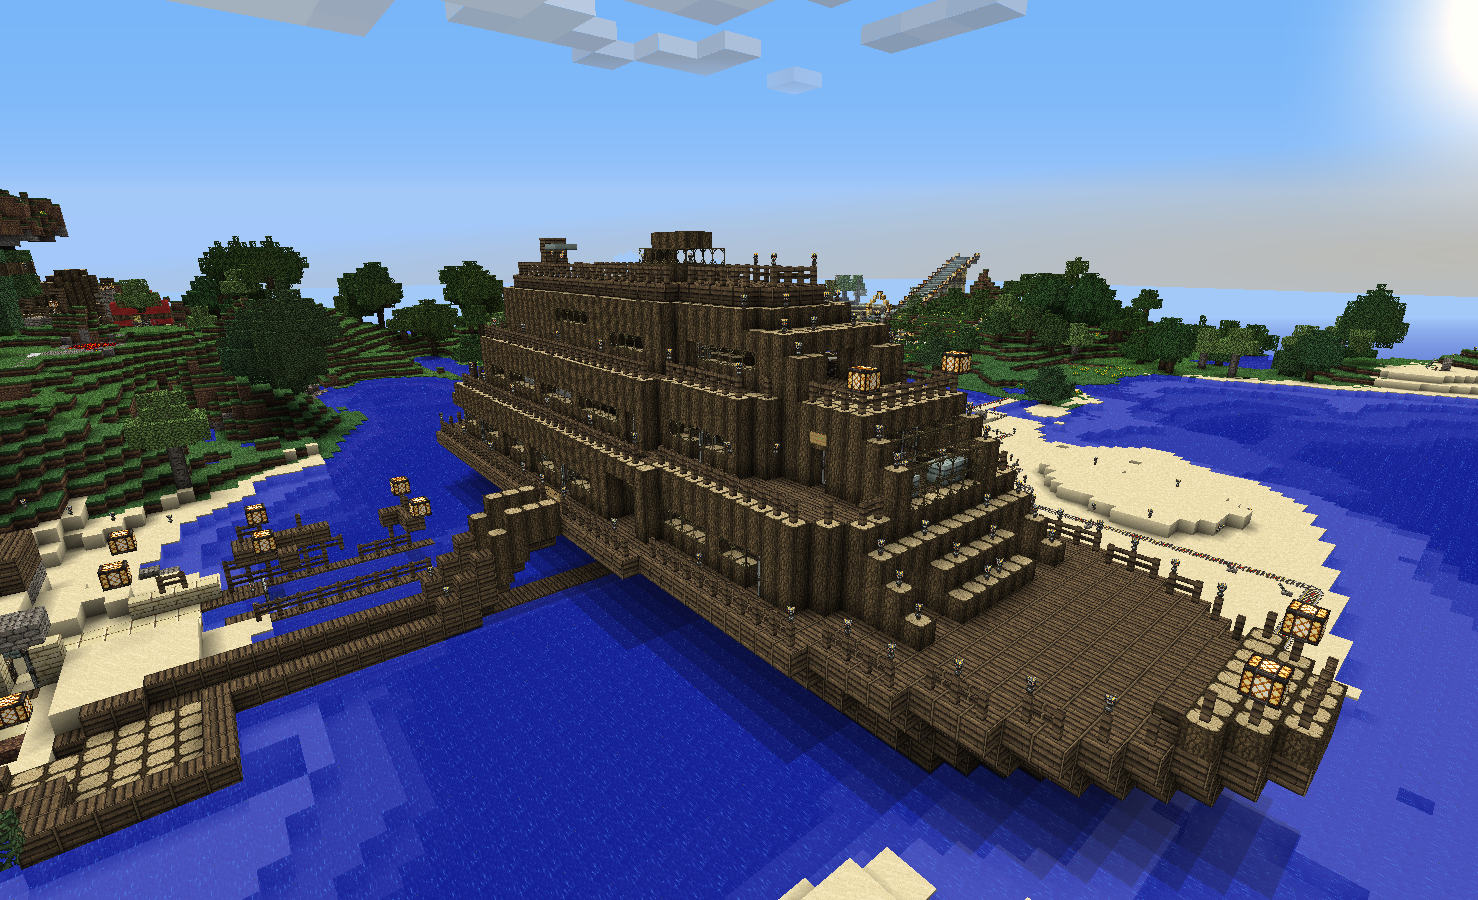 The Art of Architecture: The Minecraft Cruise Liner